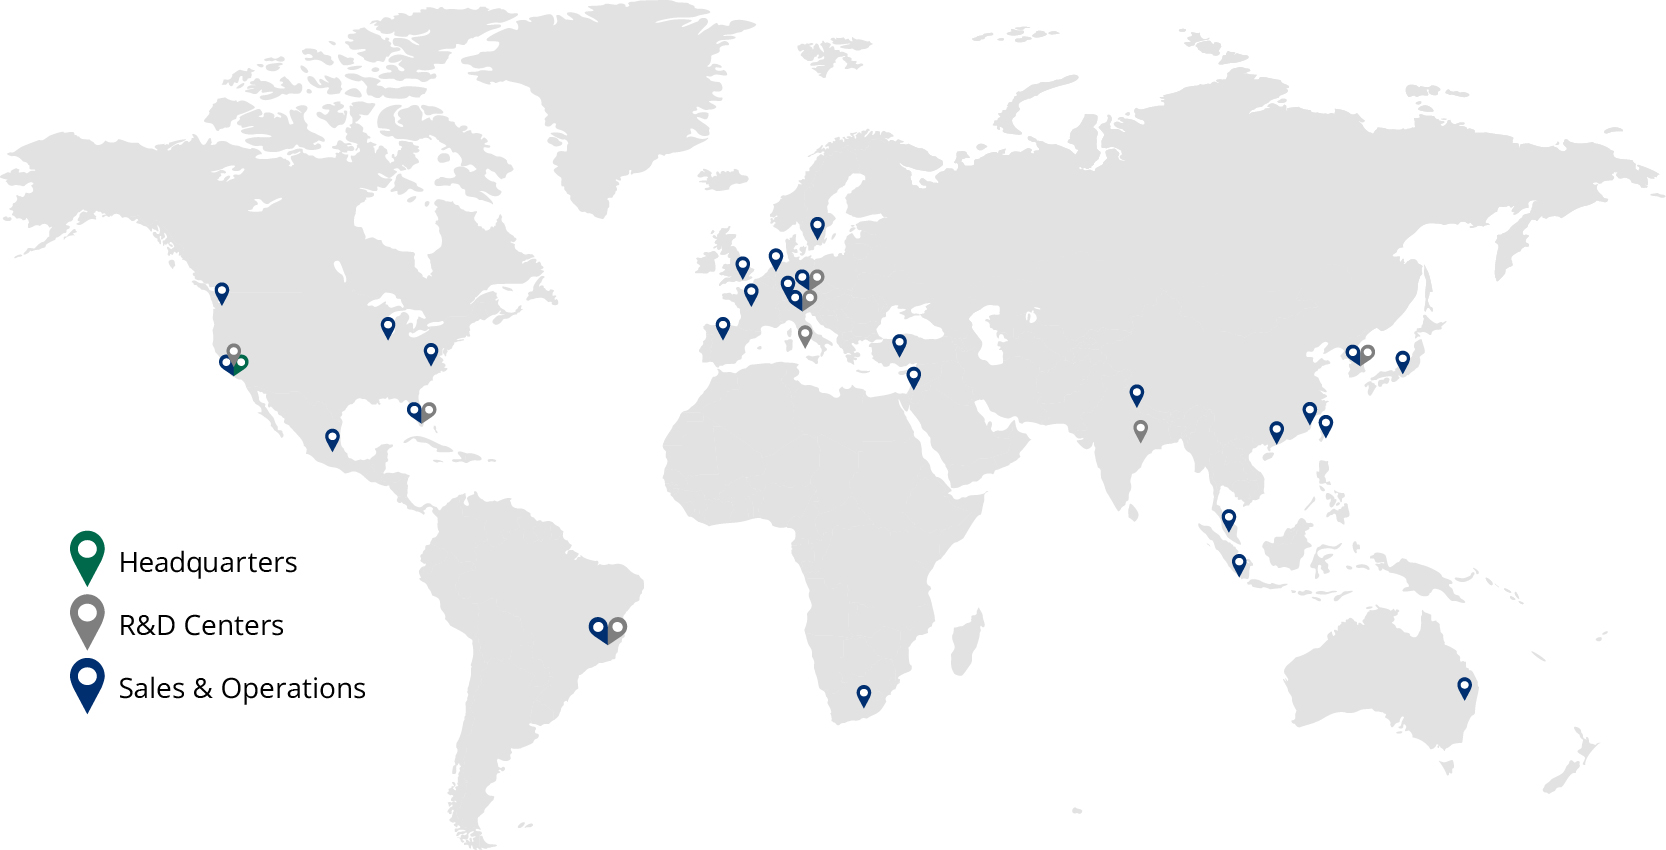 A map of Telit Cinterion's headquarters, R&D, sales and operation centers.